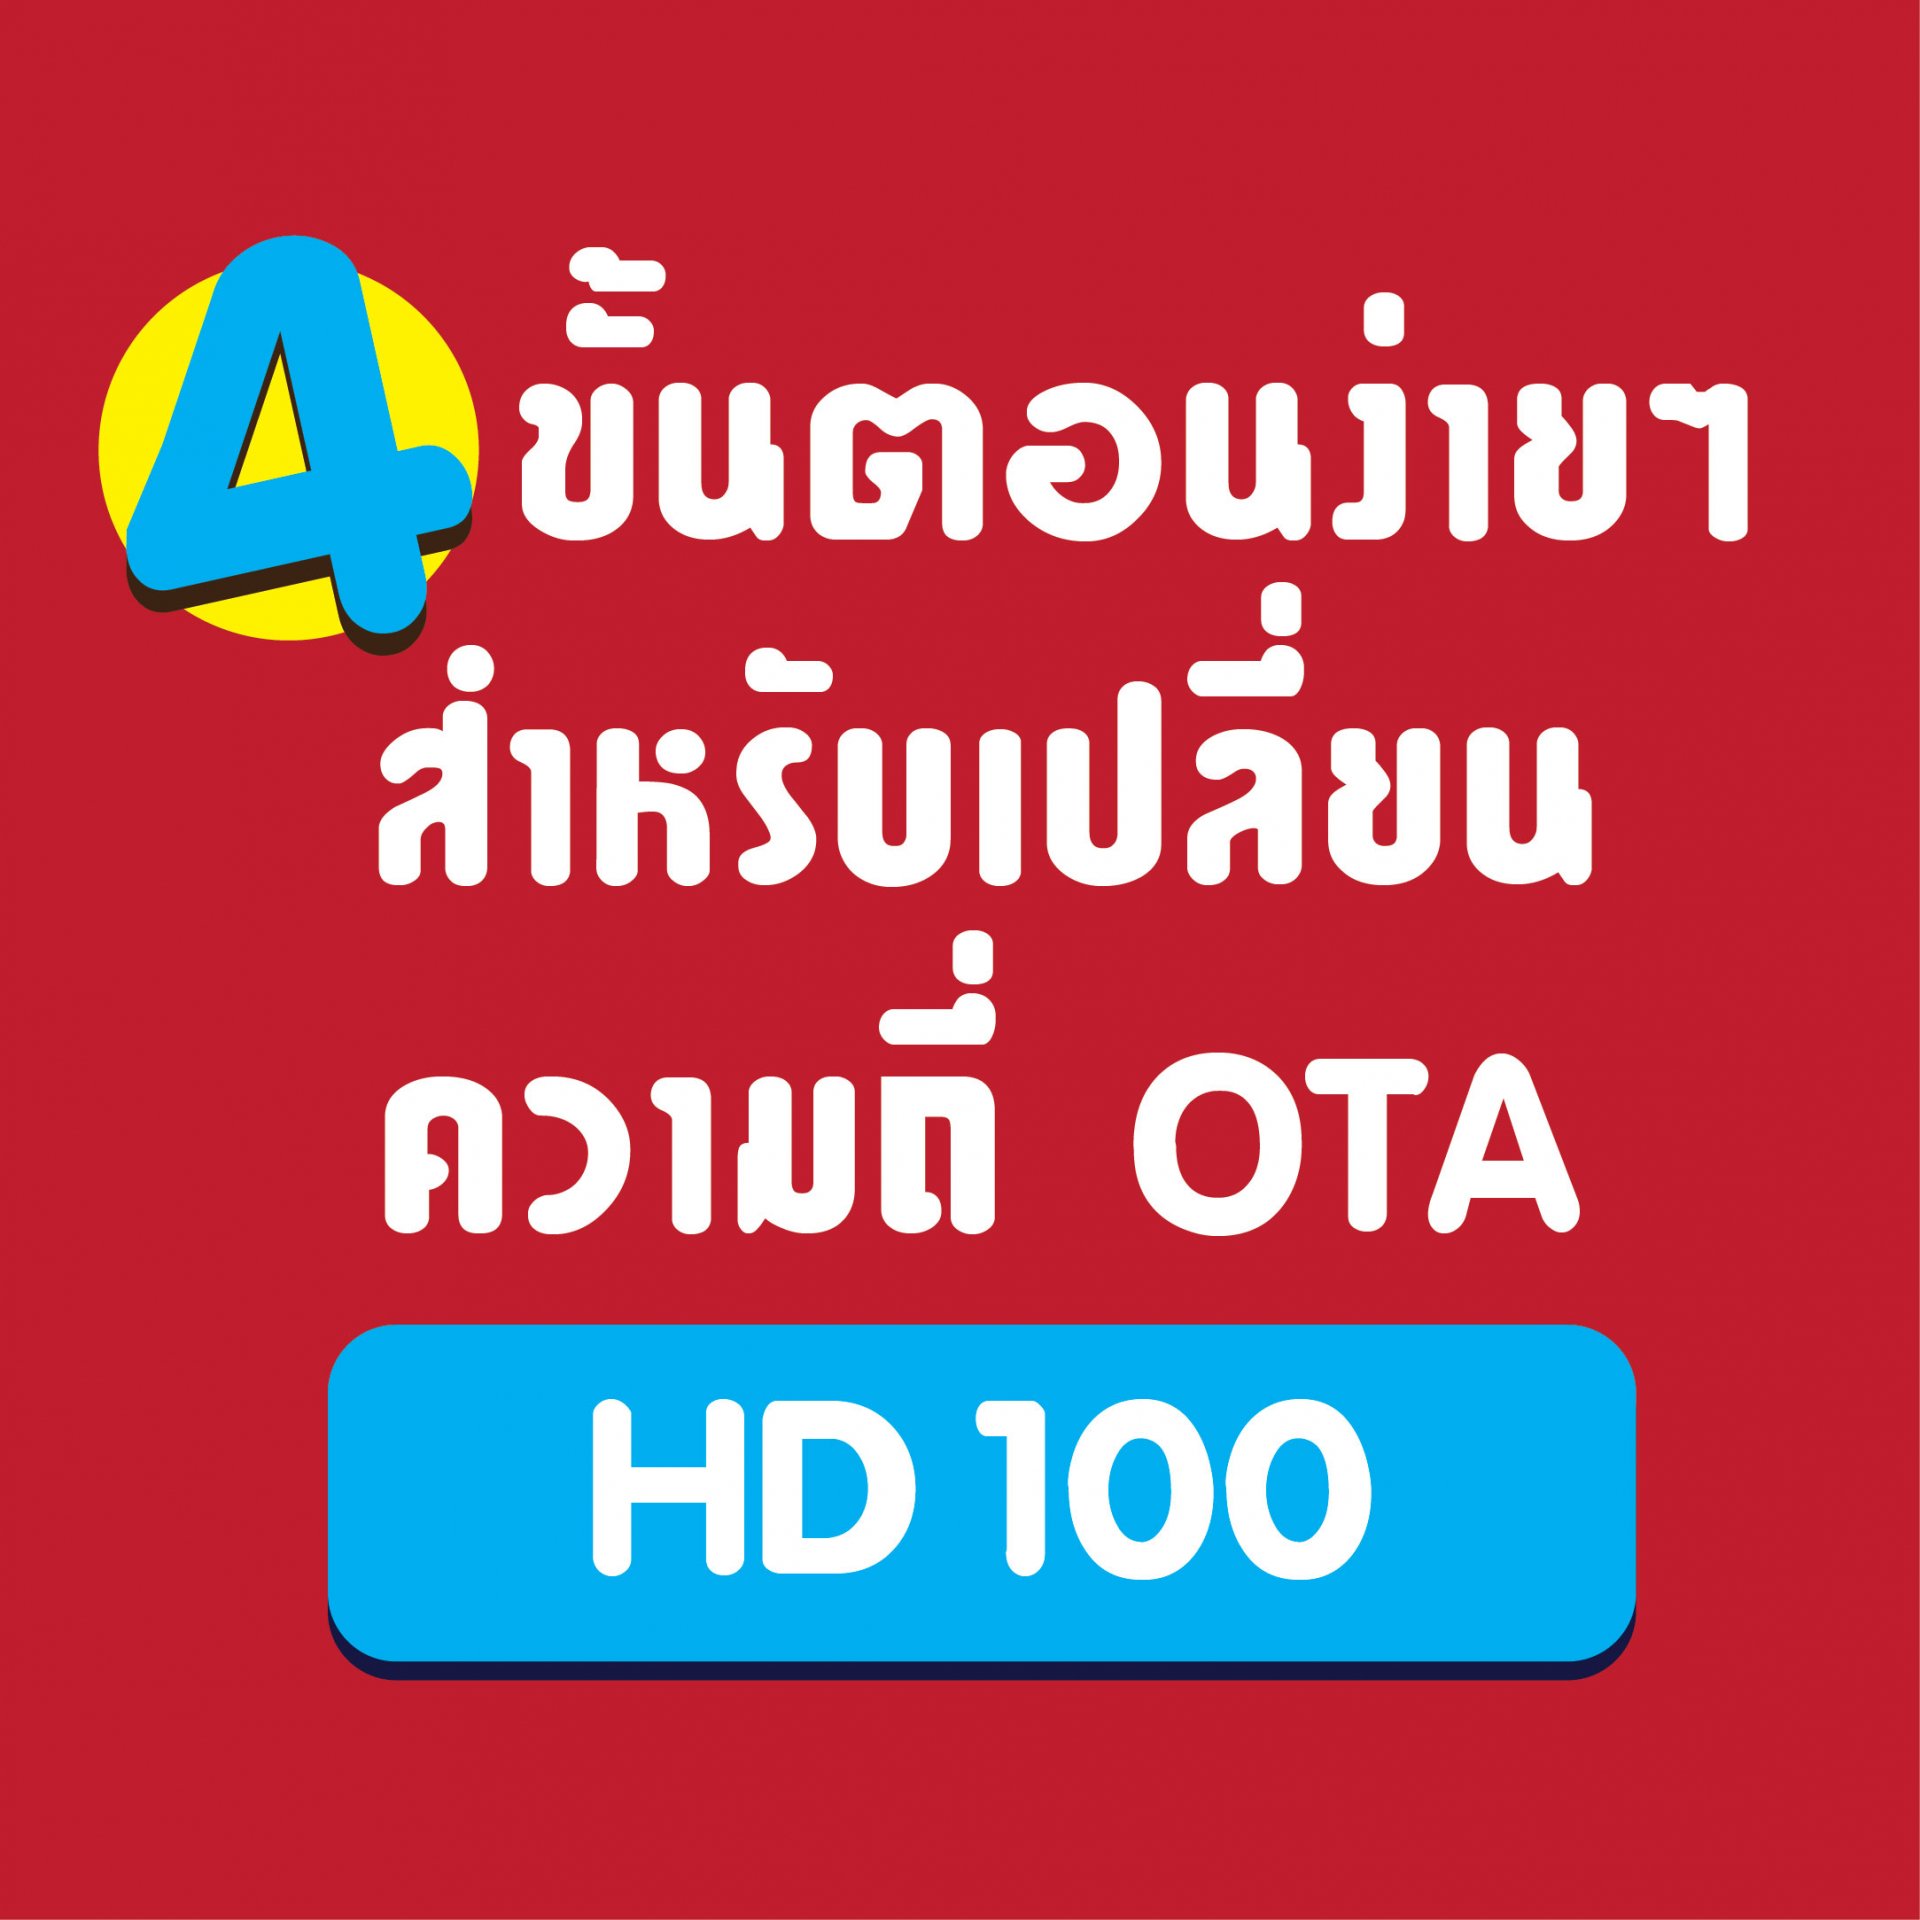 4 steps for changing the OTA frequency of the HD100